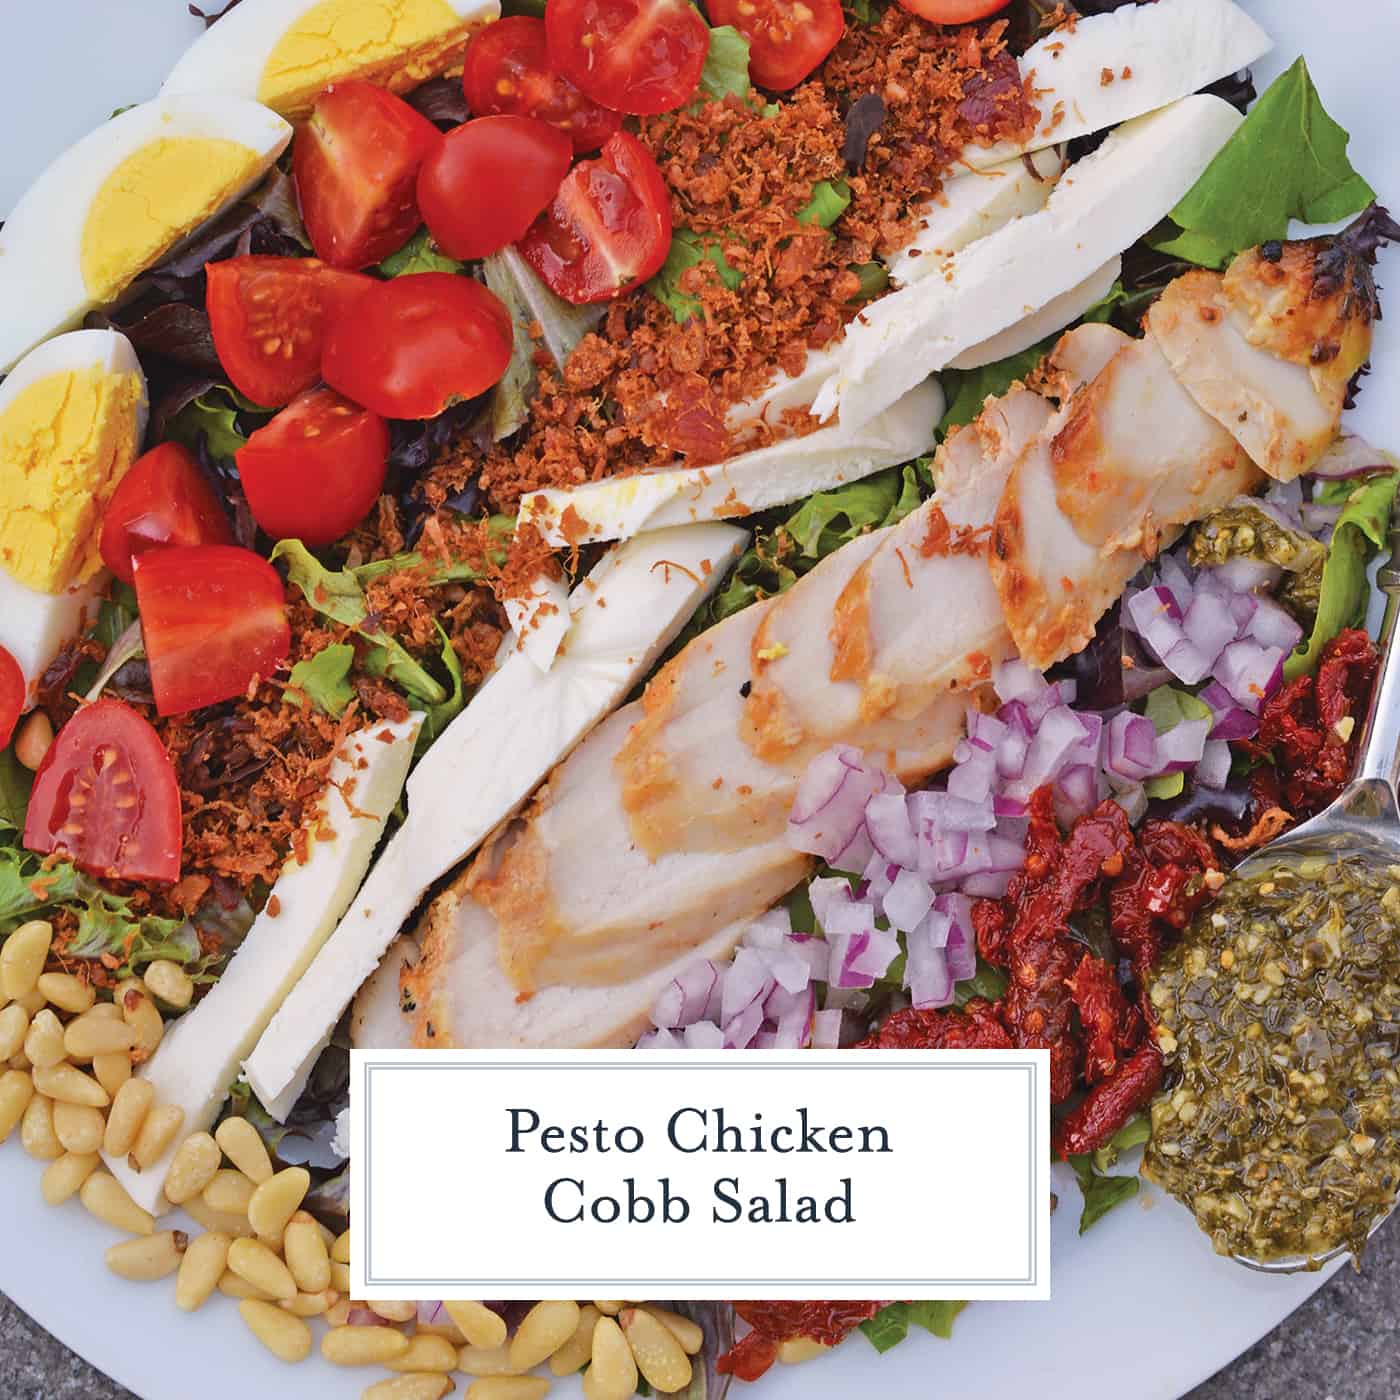 Pesto Chicken Cobb Salad is a delicious salad recipe using traditional Cobb ingredients with chicken and a pesto dressing. The perfect starter or entree! #Cobbsaladrecipe #pestochickensalad www.savoryexperiments.com